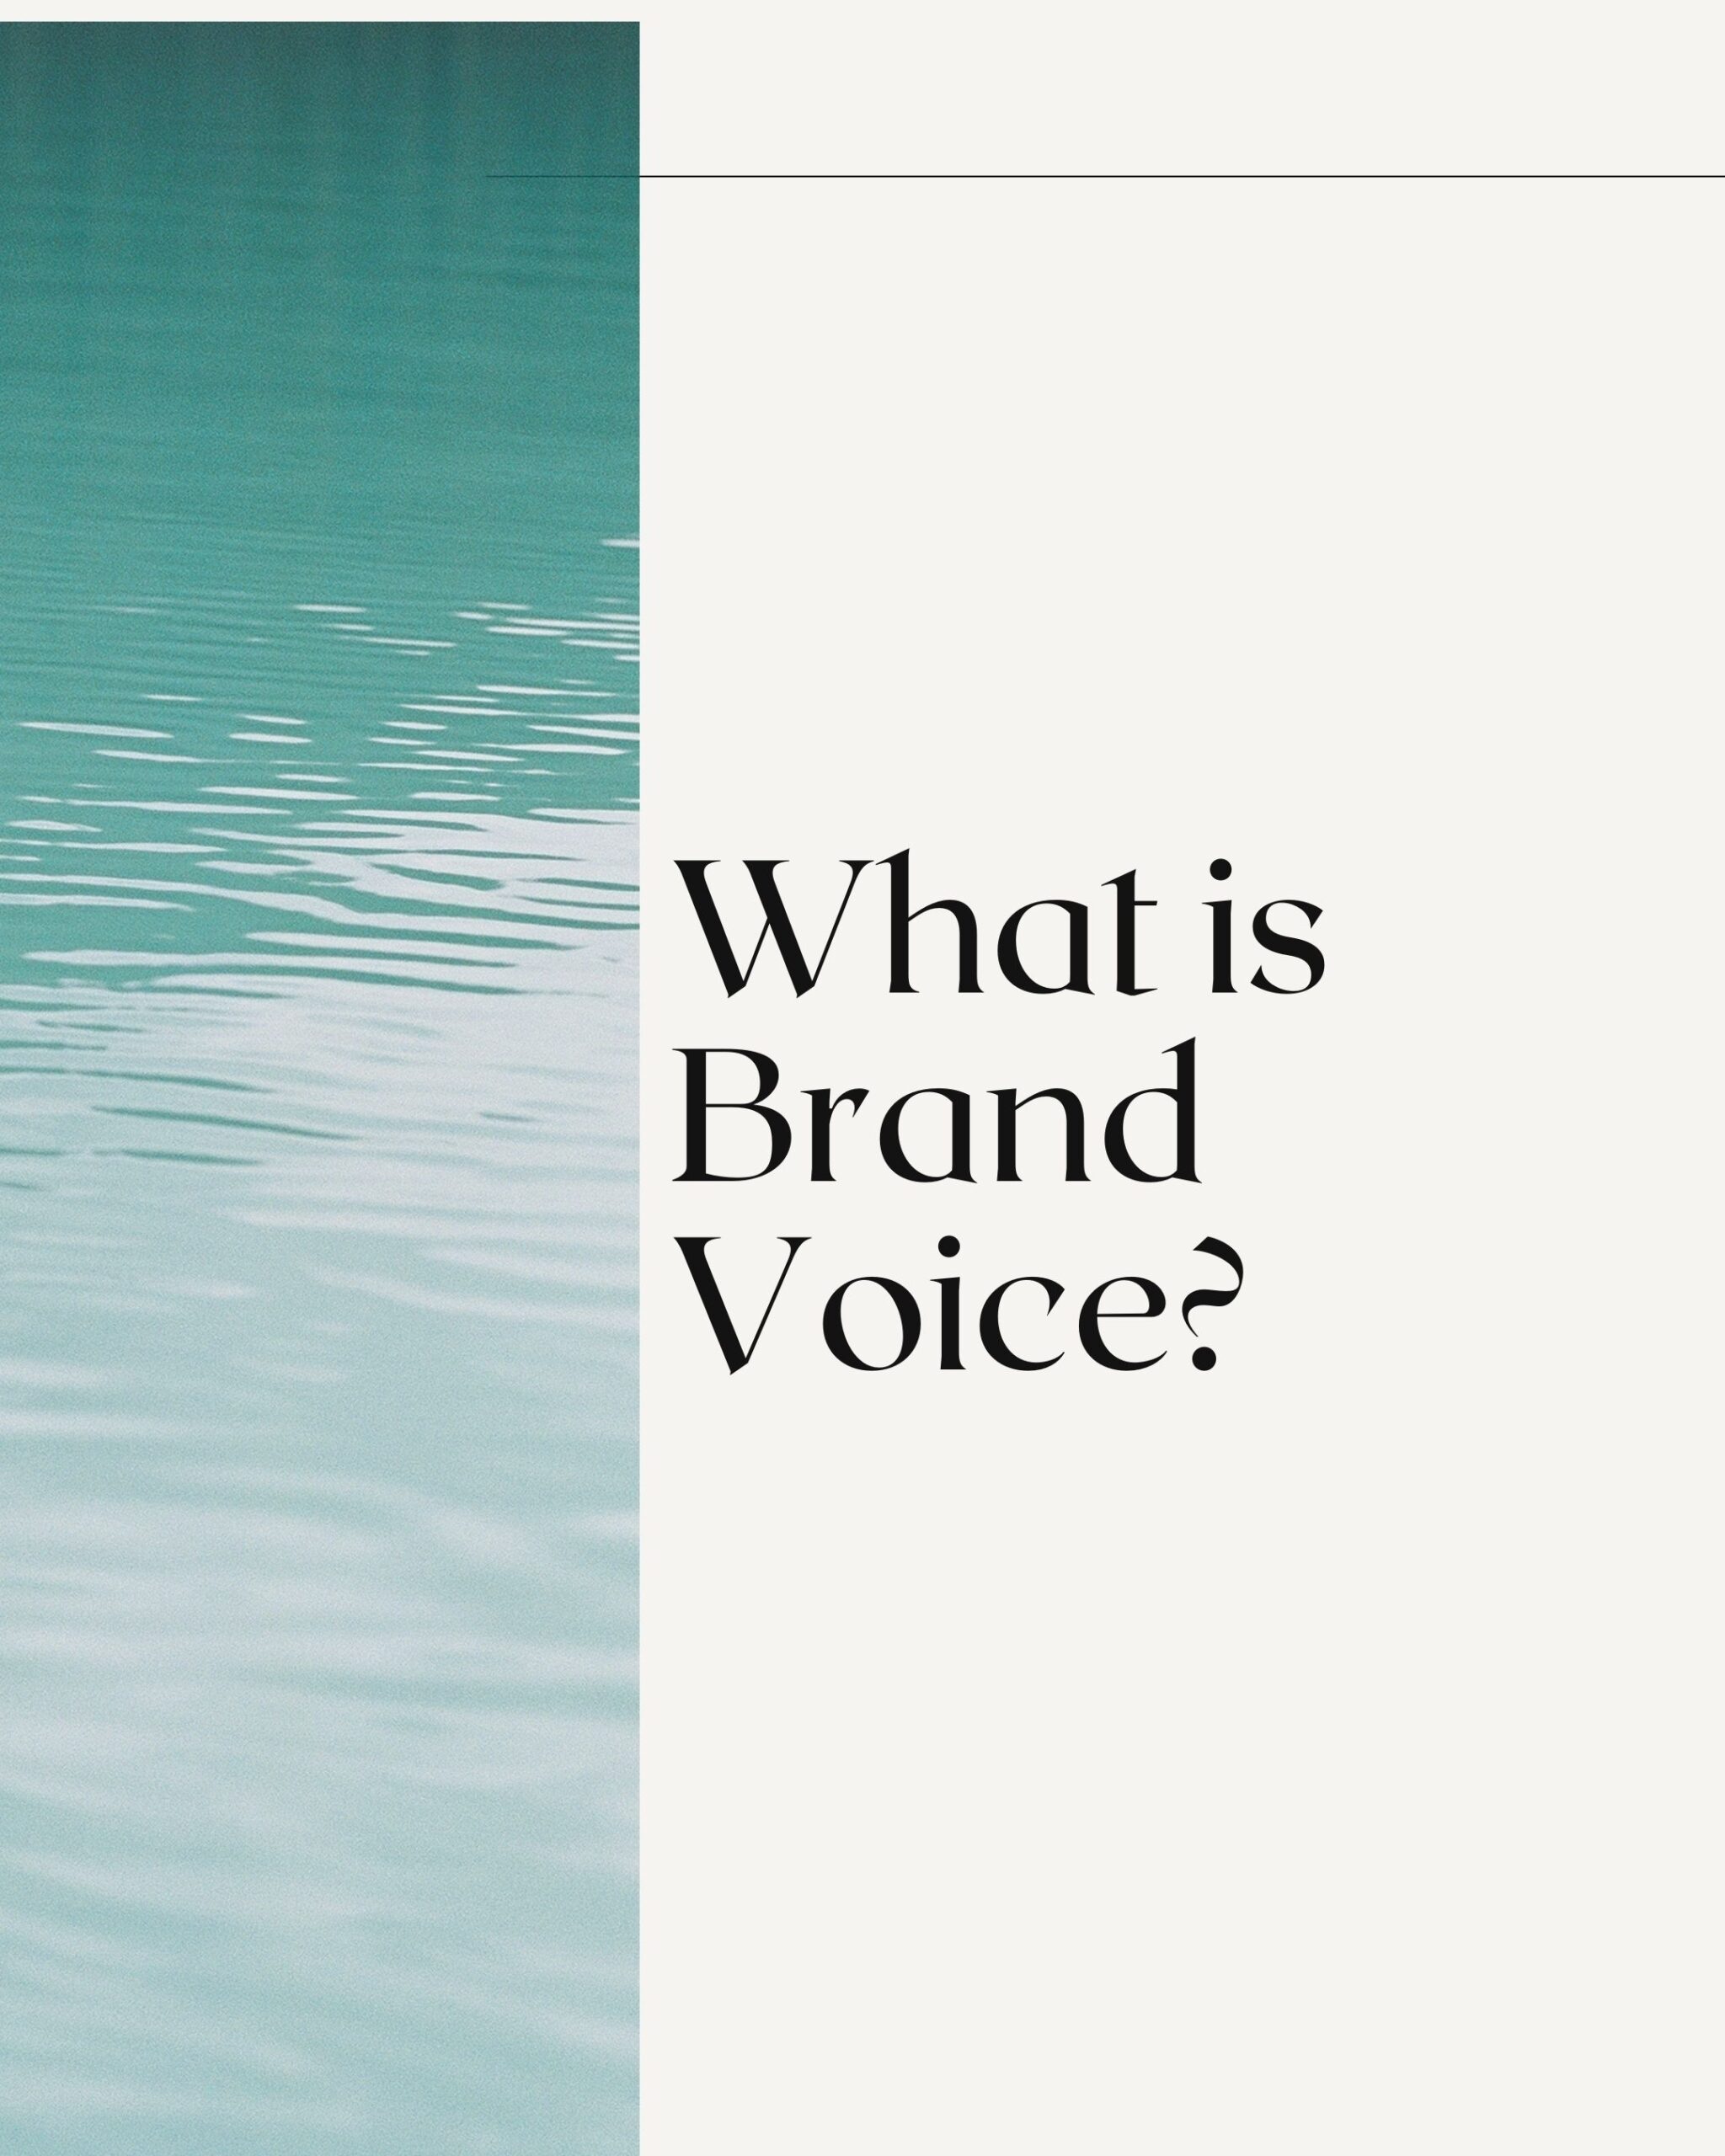 What is brand voice?